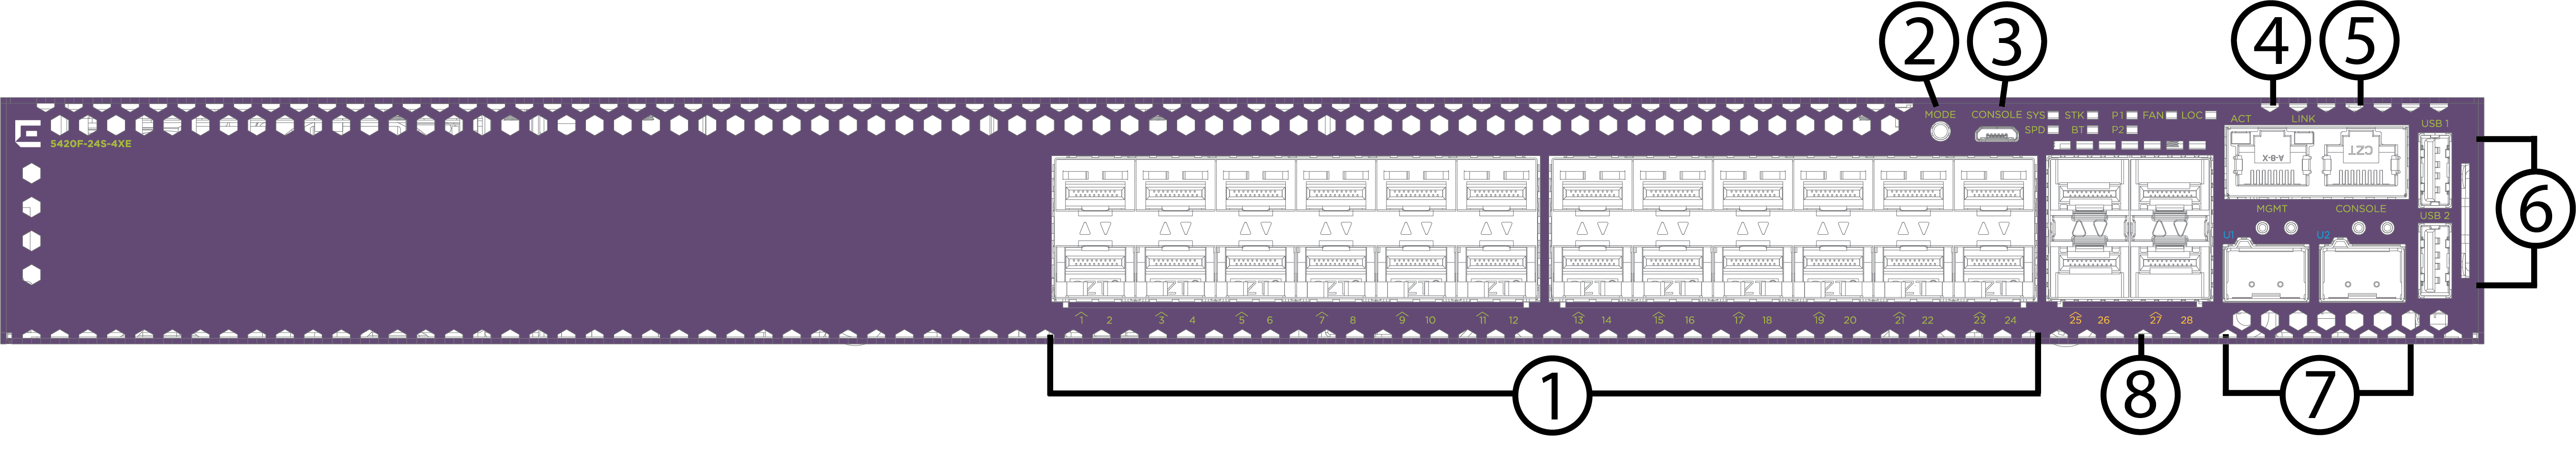 Front panel of the 5420F-24S-4XE